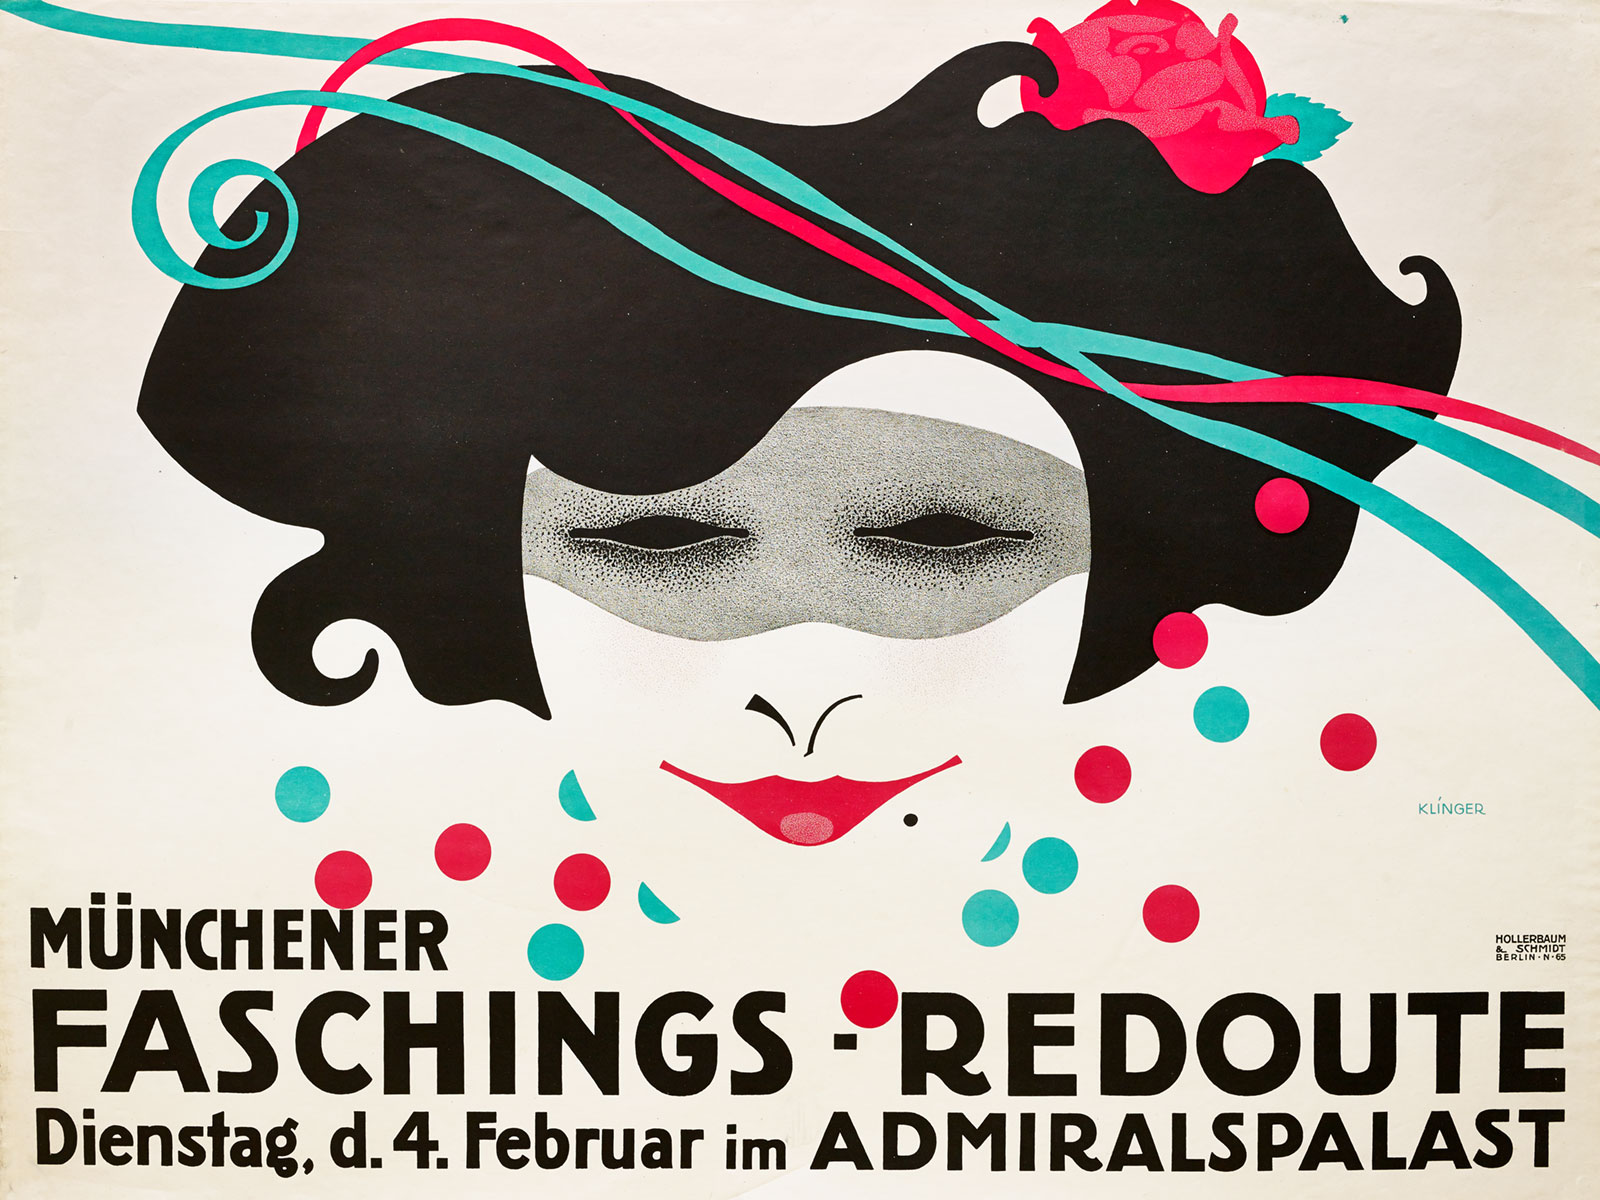 Poster depicting a woman wearing a mask